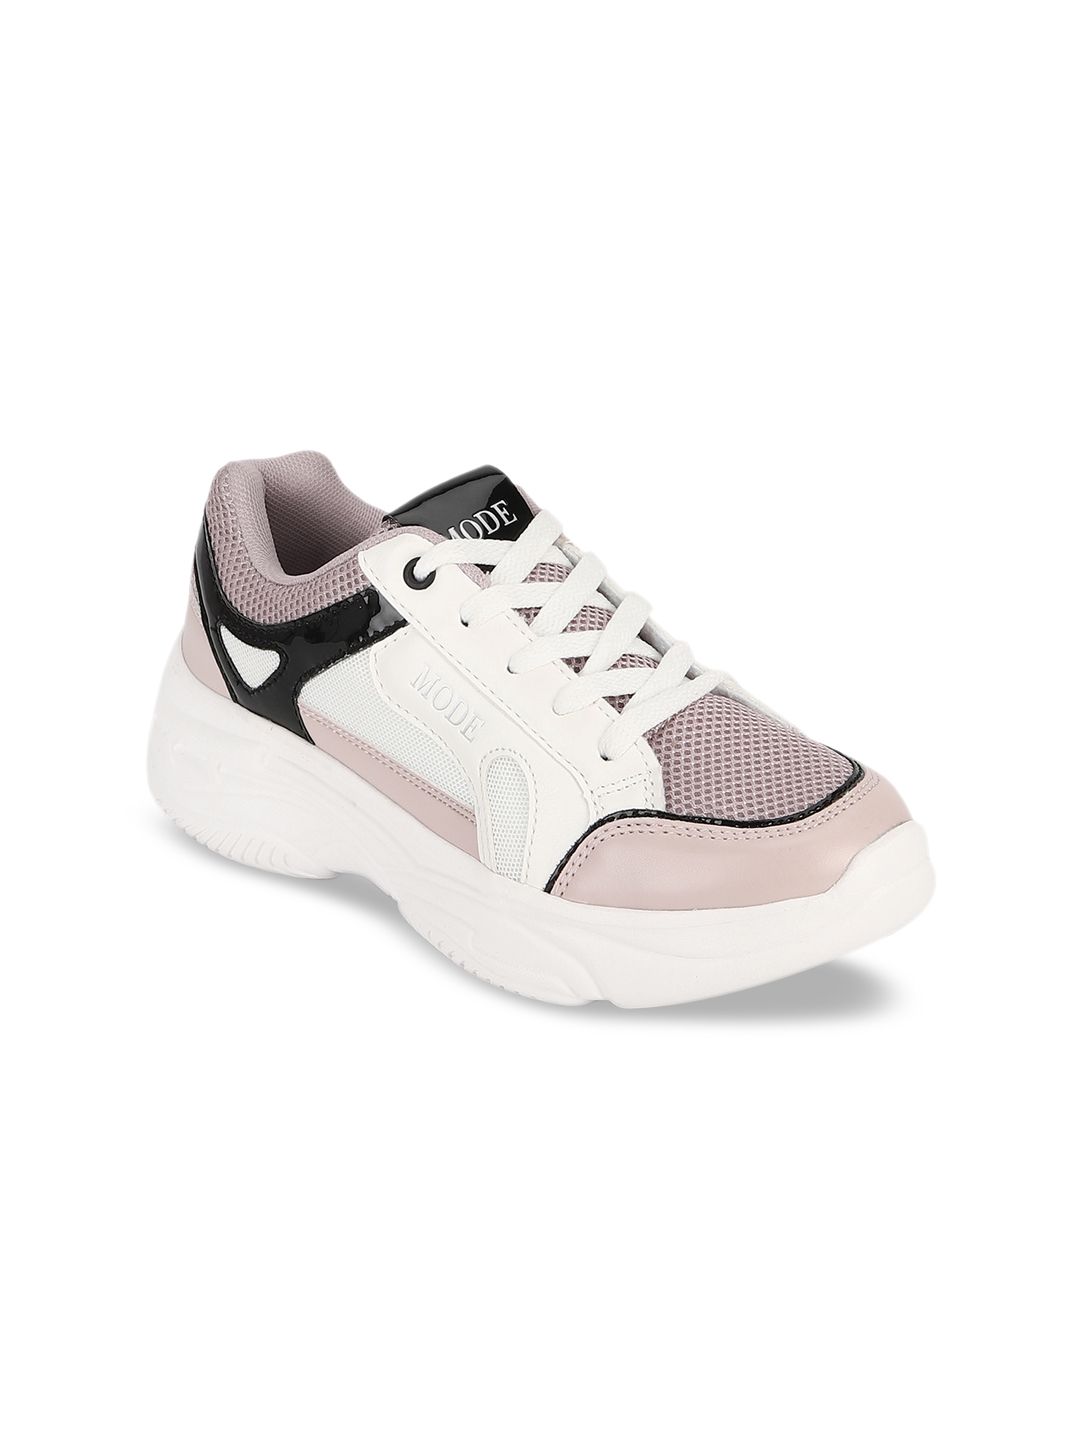 Mode by Red Tape Women Mauve Mesh Walking Shoes Price in India